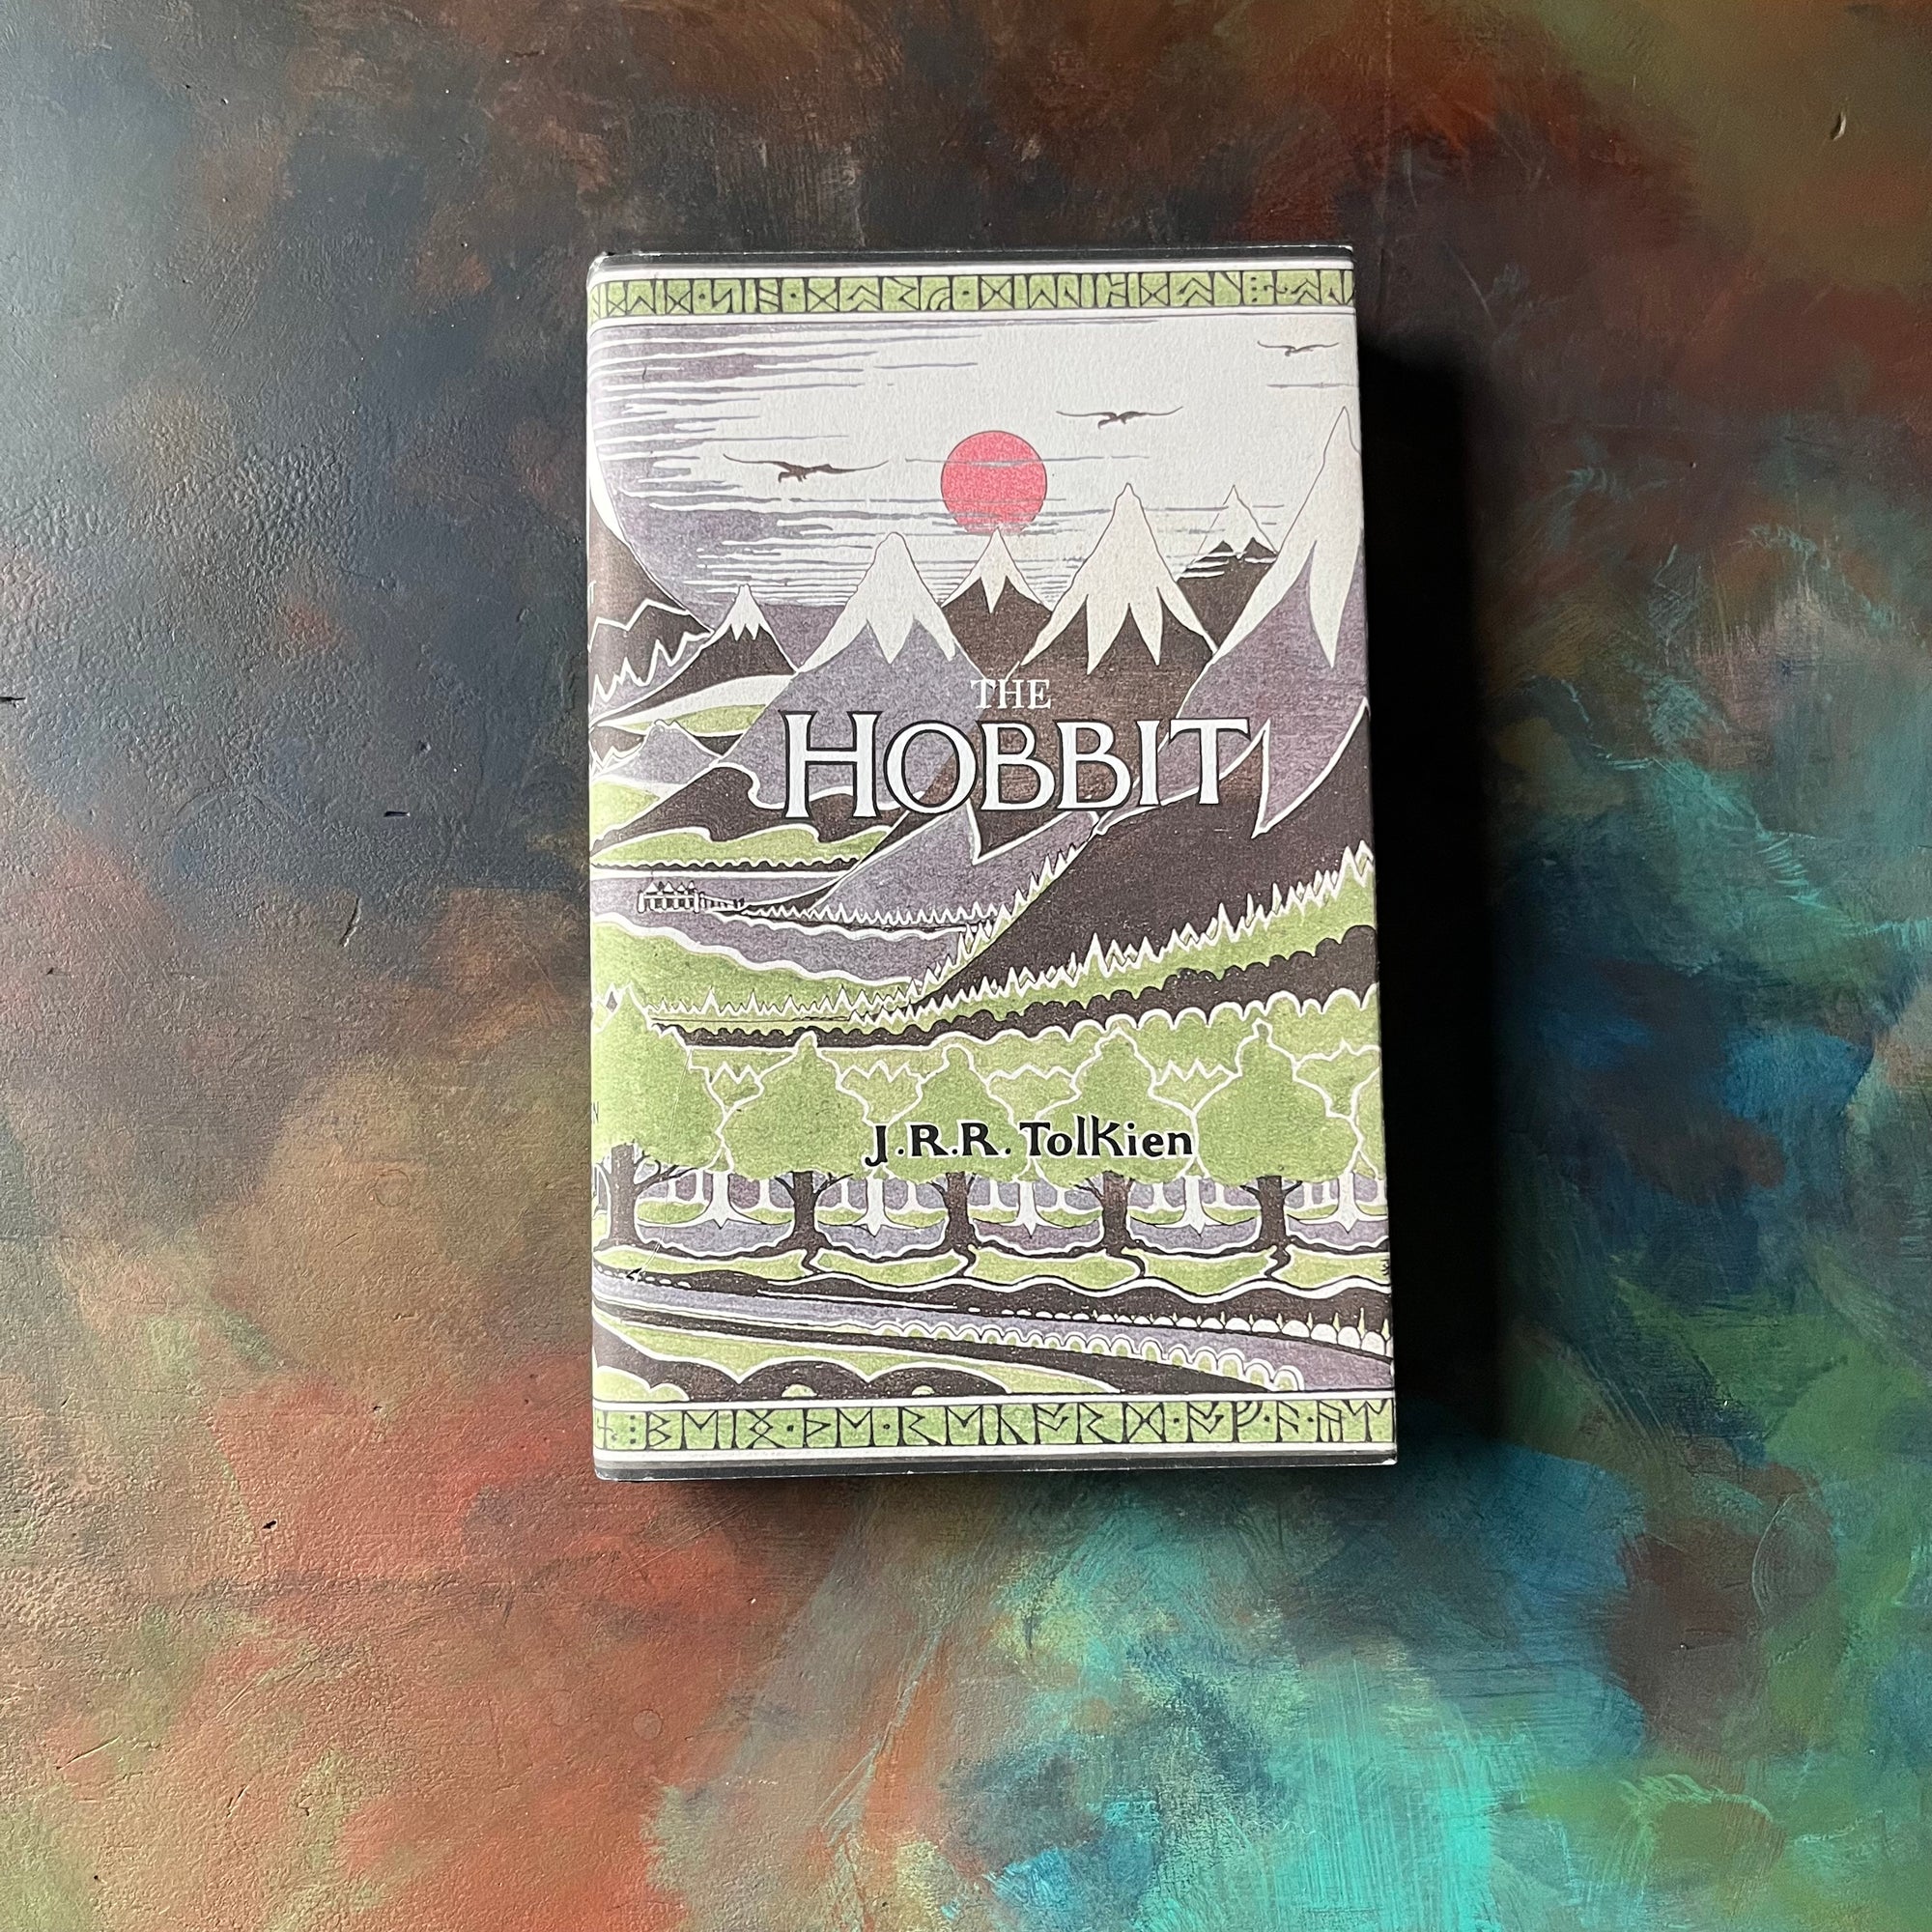 The Hobbit by J.R.R. Tolkien-2007 Houghton Mifflin Company Edition-vintage fantasy book-view of the dust jacket's front cover with the illustration from the original cover